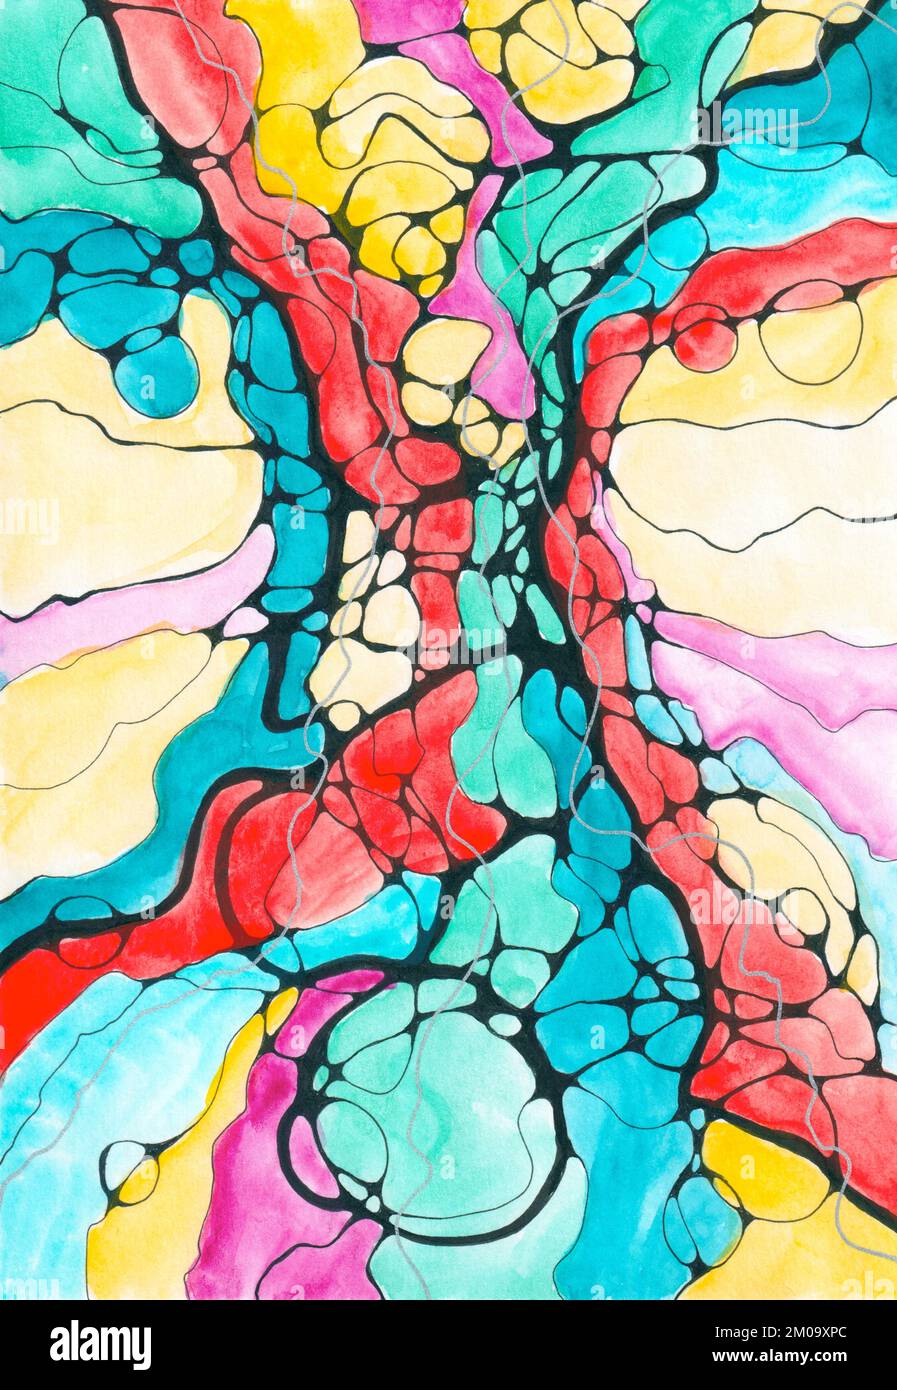 Hand drawn Neurographic illustration of a tree. Colorful painting drawn with black marker, watercolors and multi colored markers. Art therapy. Stock Photo